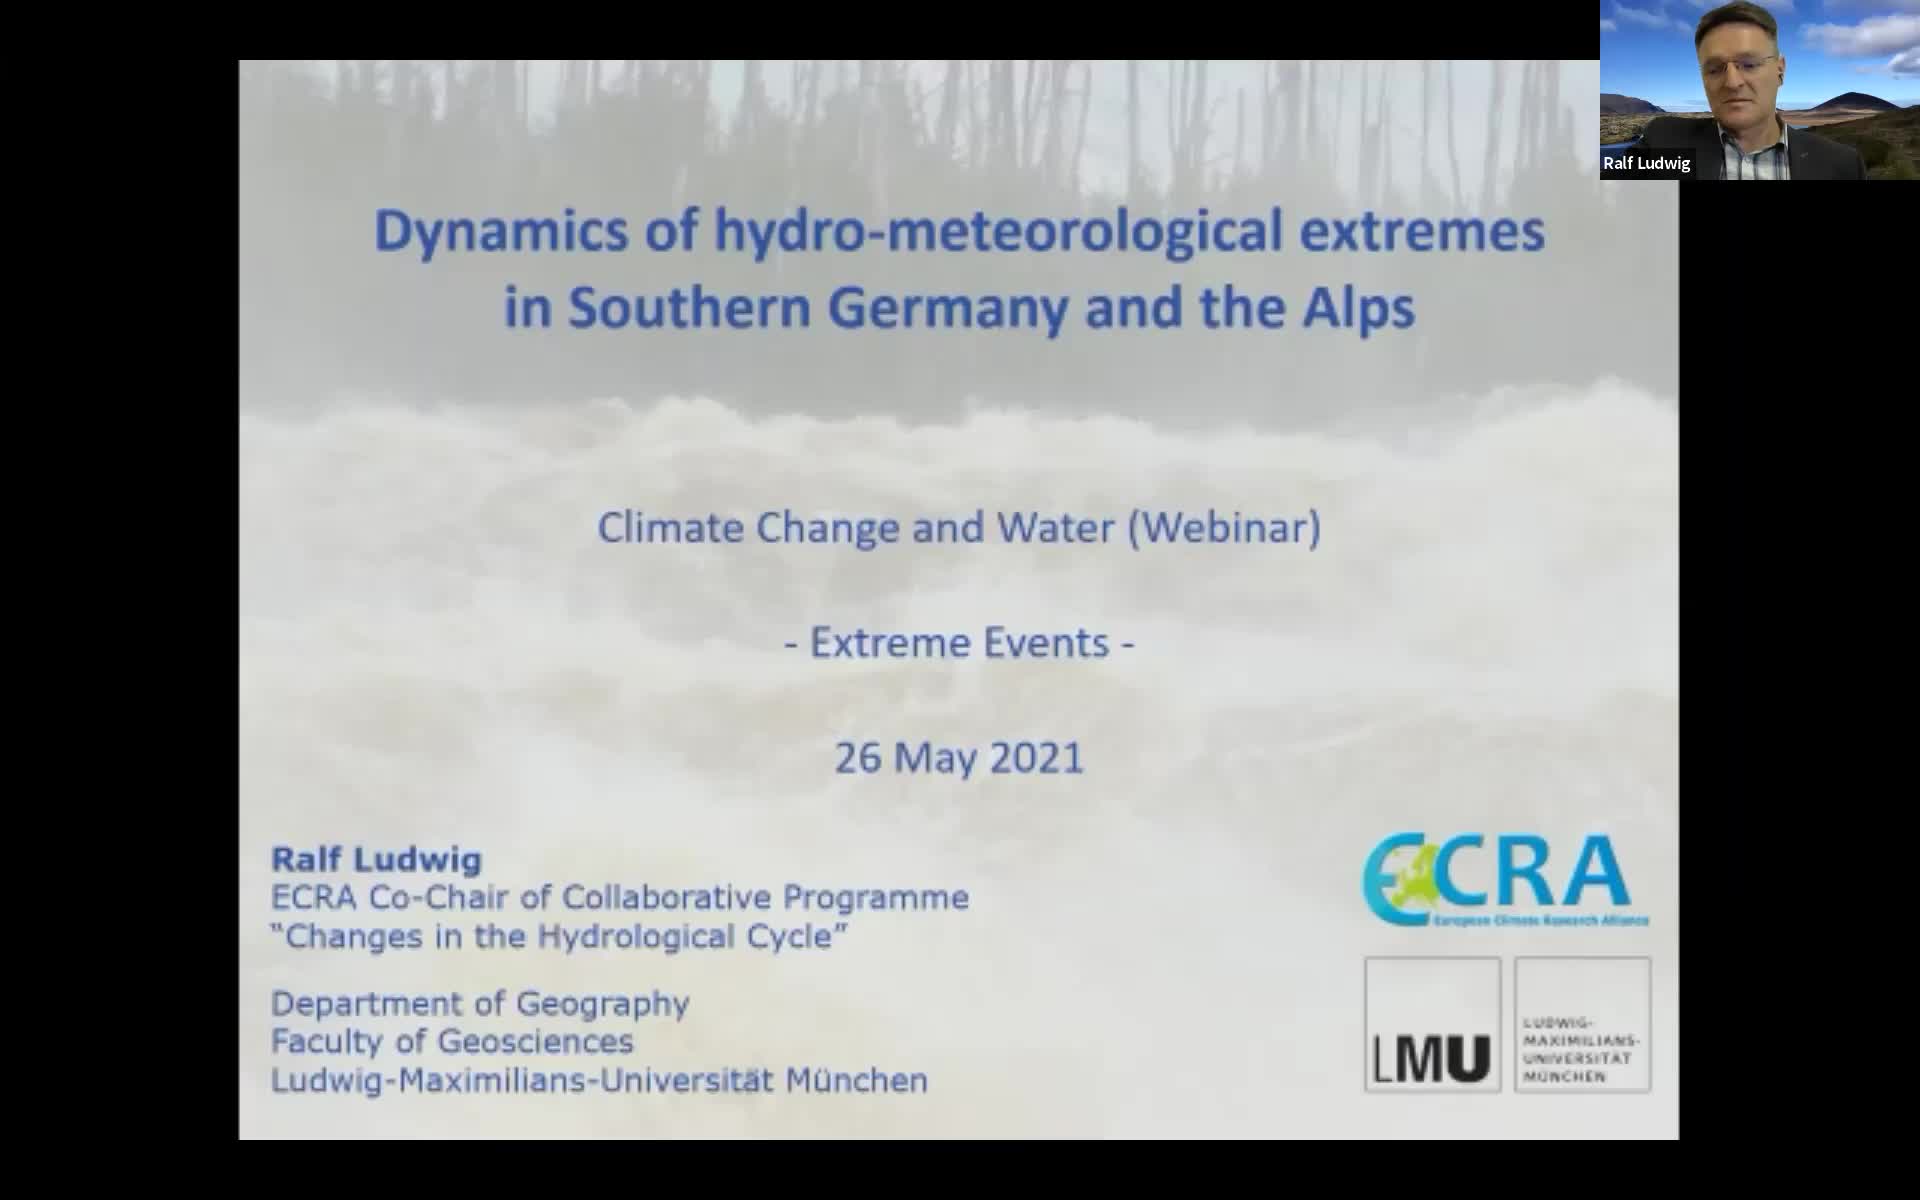 S2-Dynamics of hydrometeorological extremes in Southern Germany and the Alps